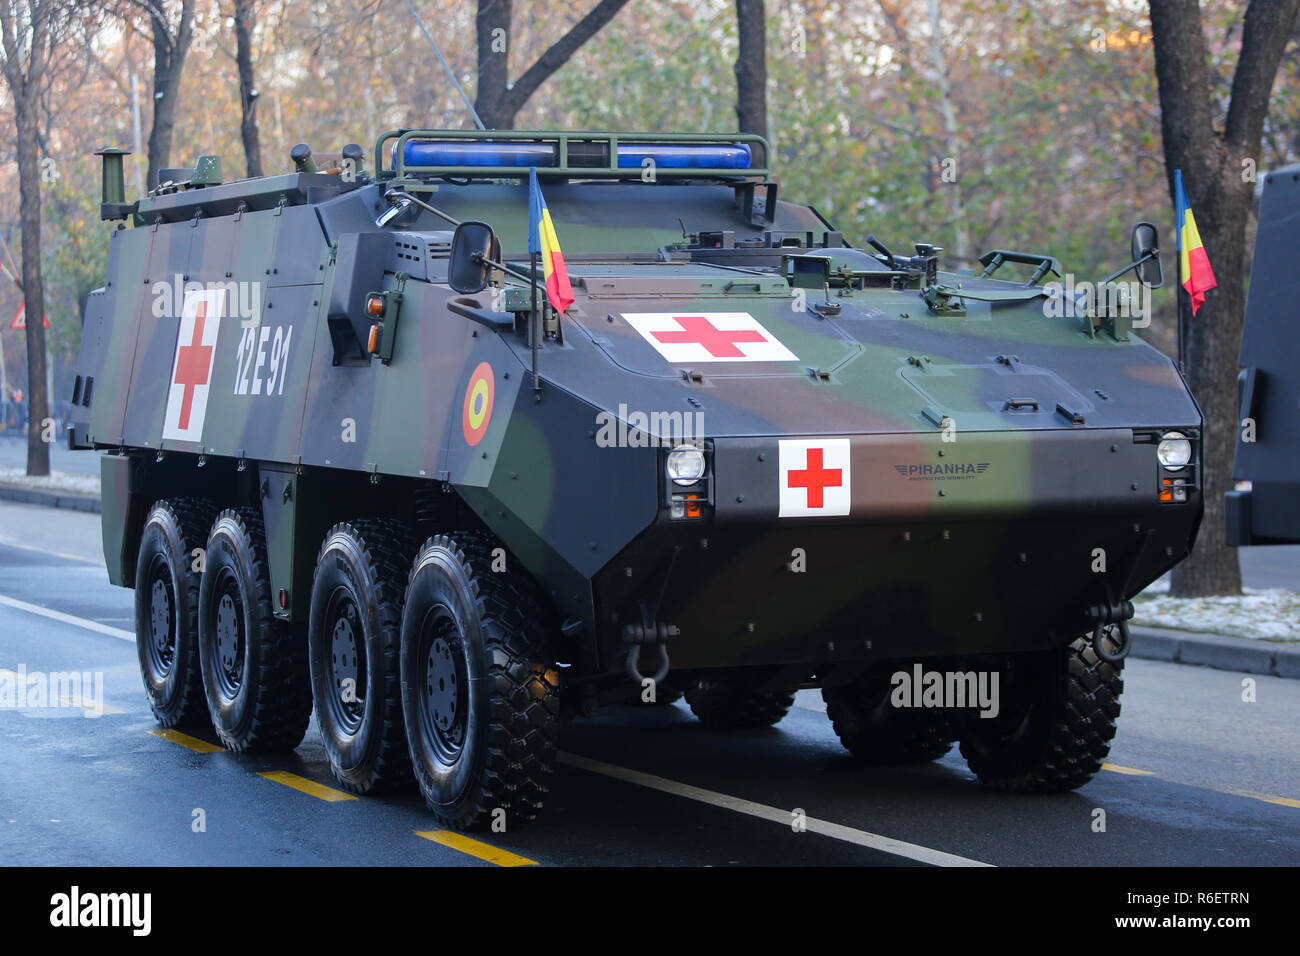 BUCHAREST, ROMANIA - December 1, 2018: Mowag Piranha armored medical military vehicle at Romanian National Day military parade Stock Photo